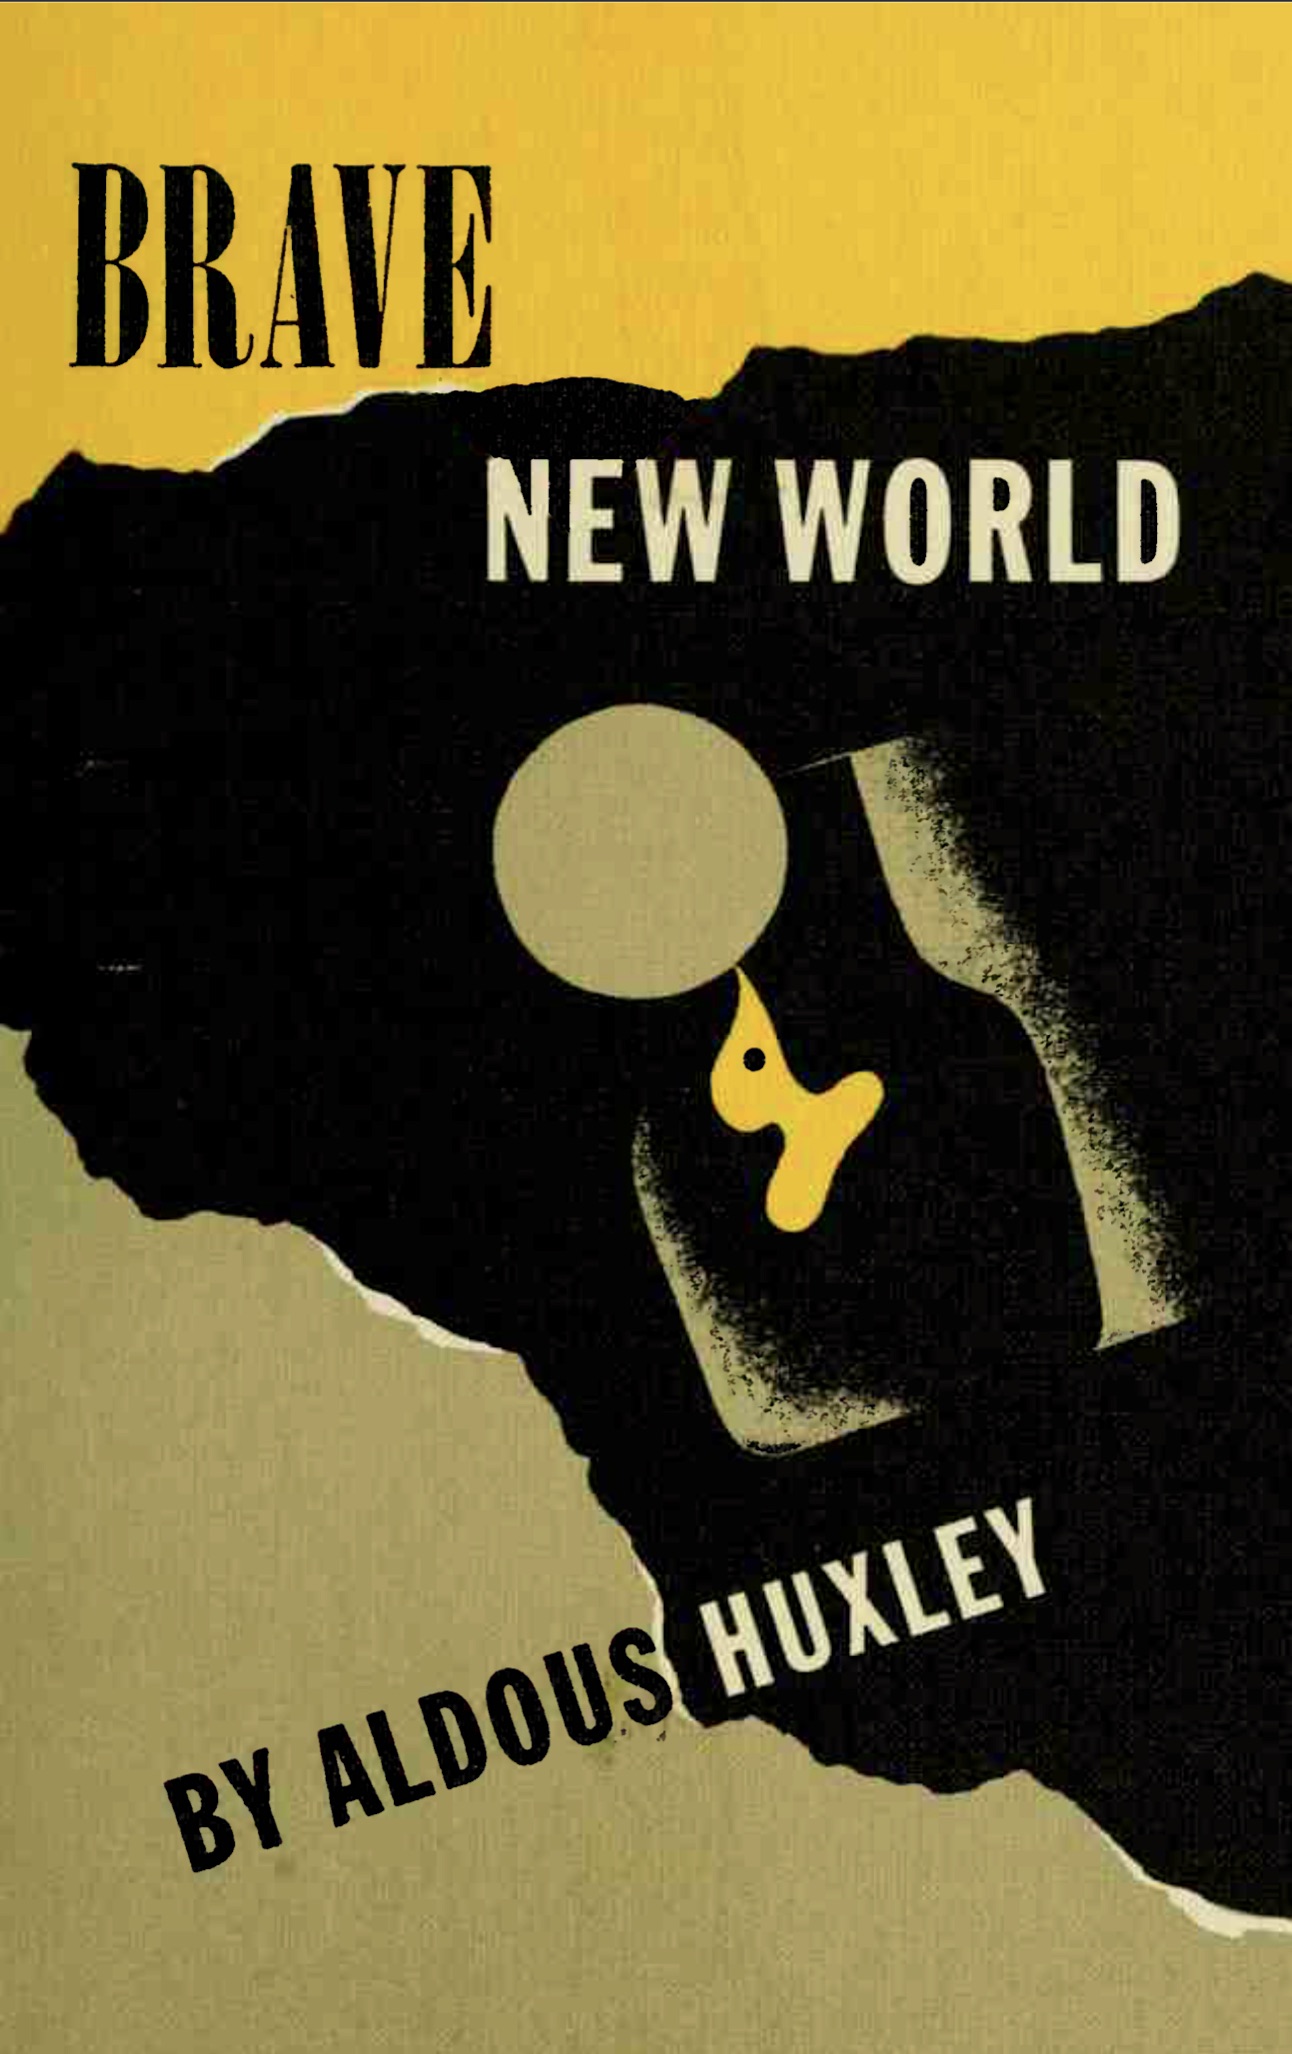 Front cover of Brave New World (1932) by Aldous Huxley